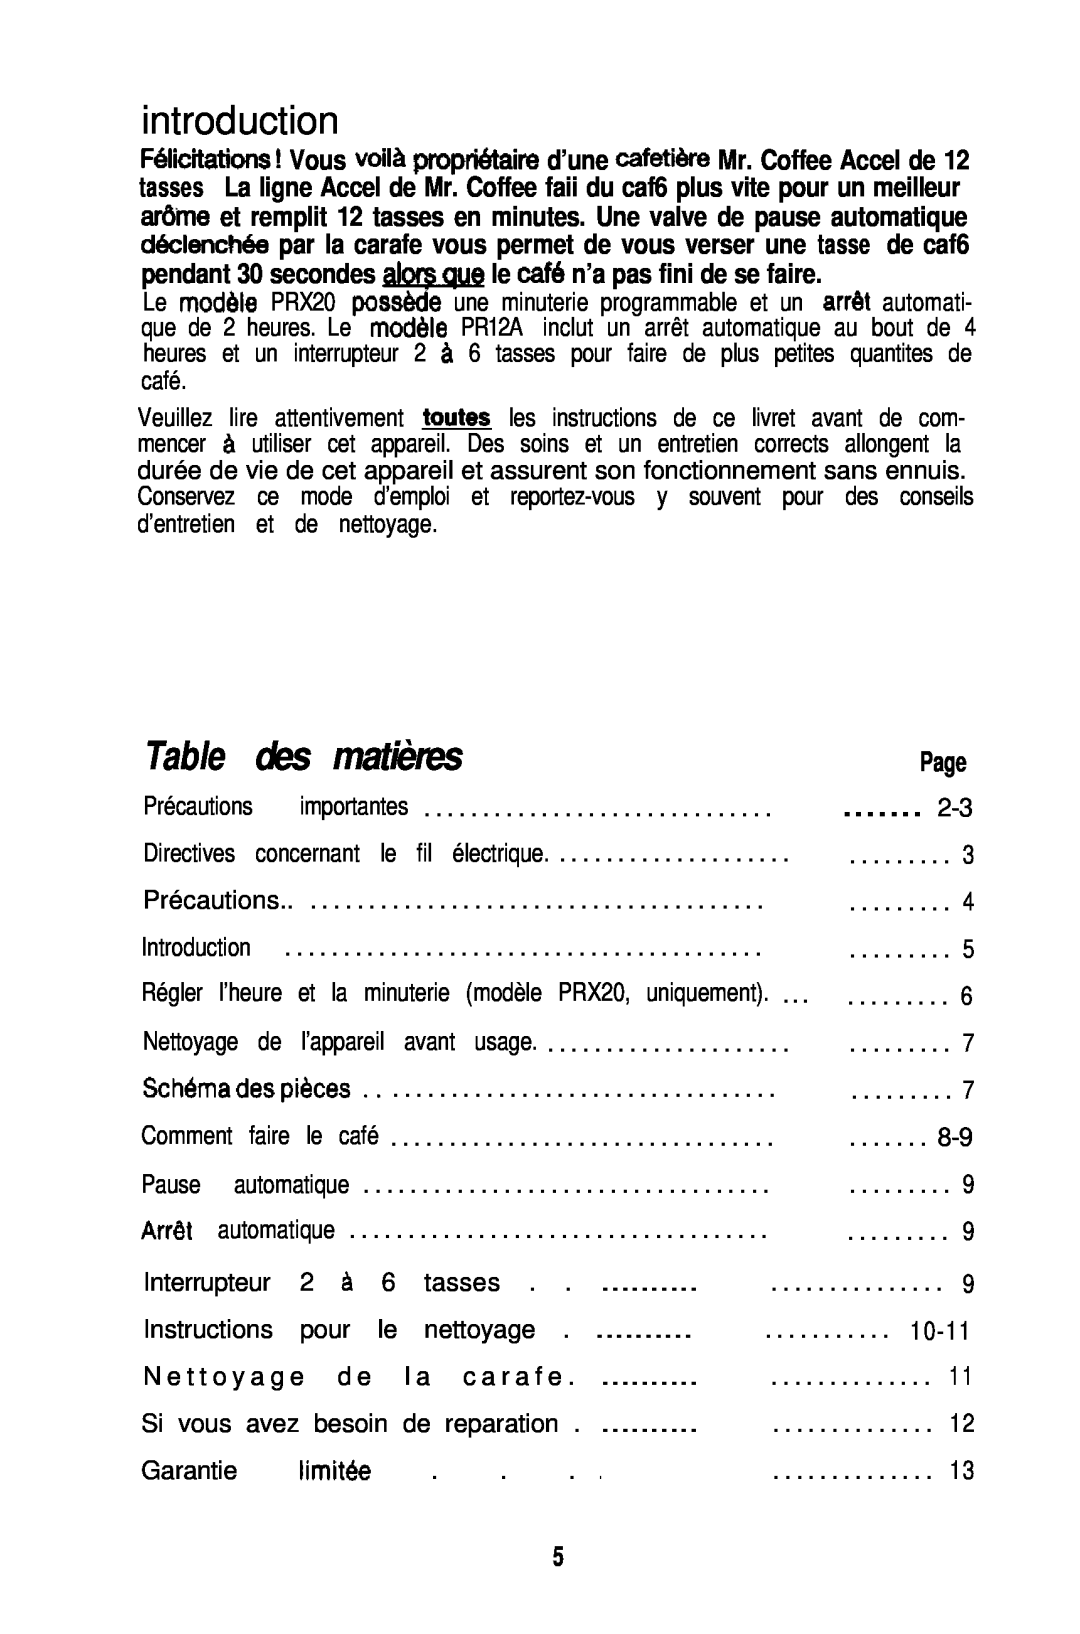 Mr. Coffee PR12A, PRX20 operating instructions Table des matières, Page, introduction 